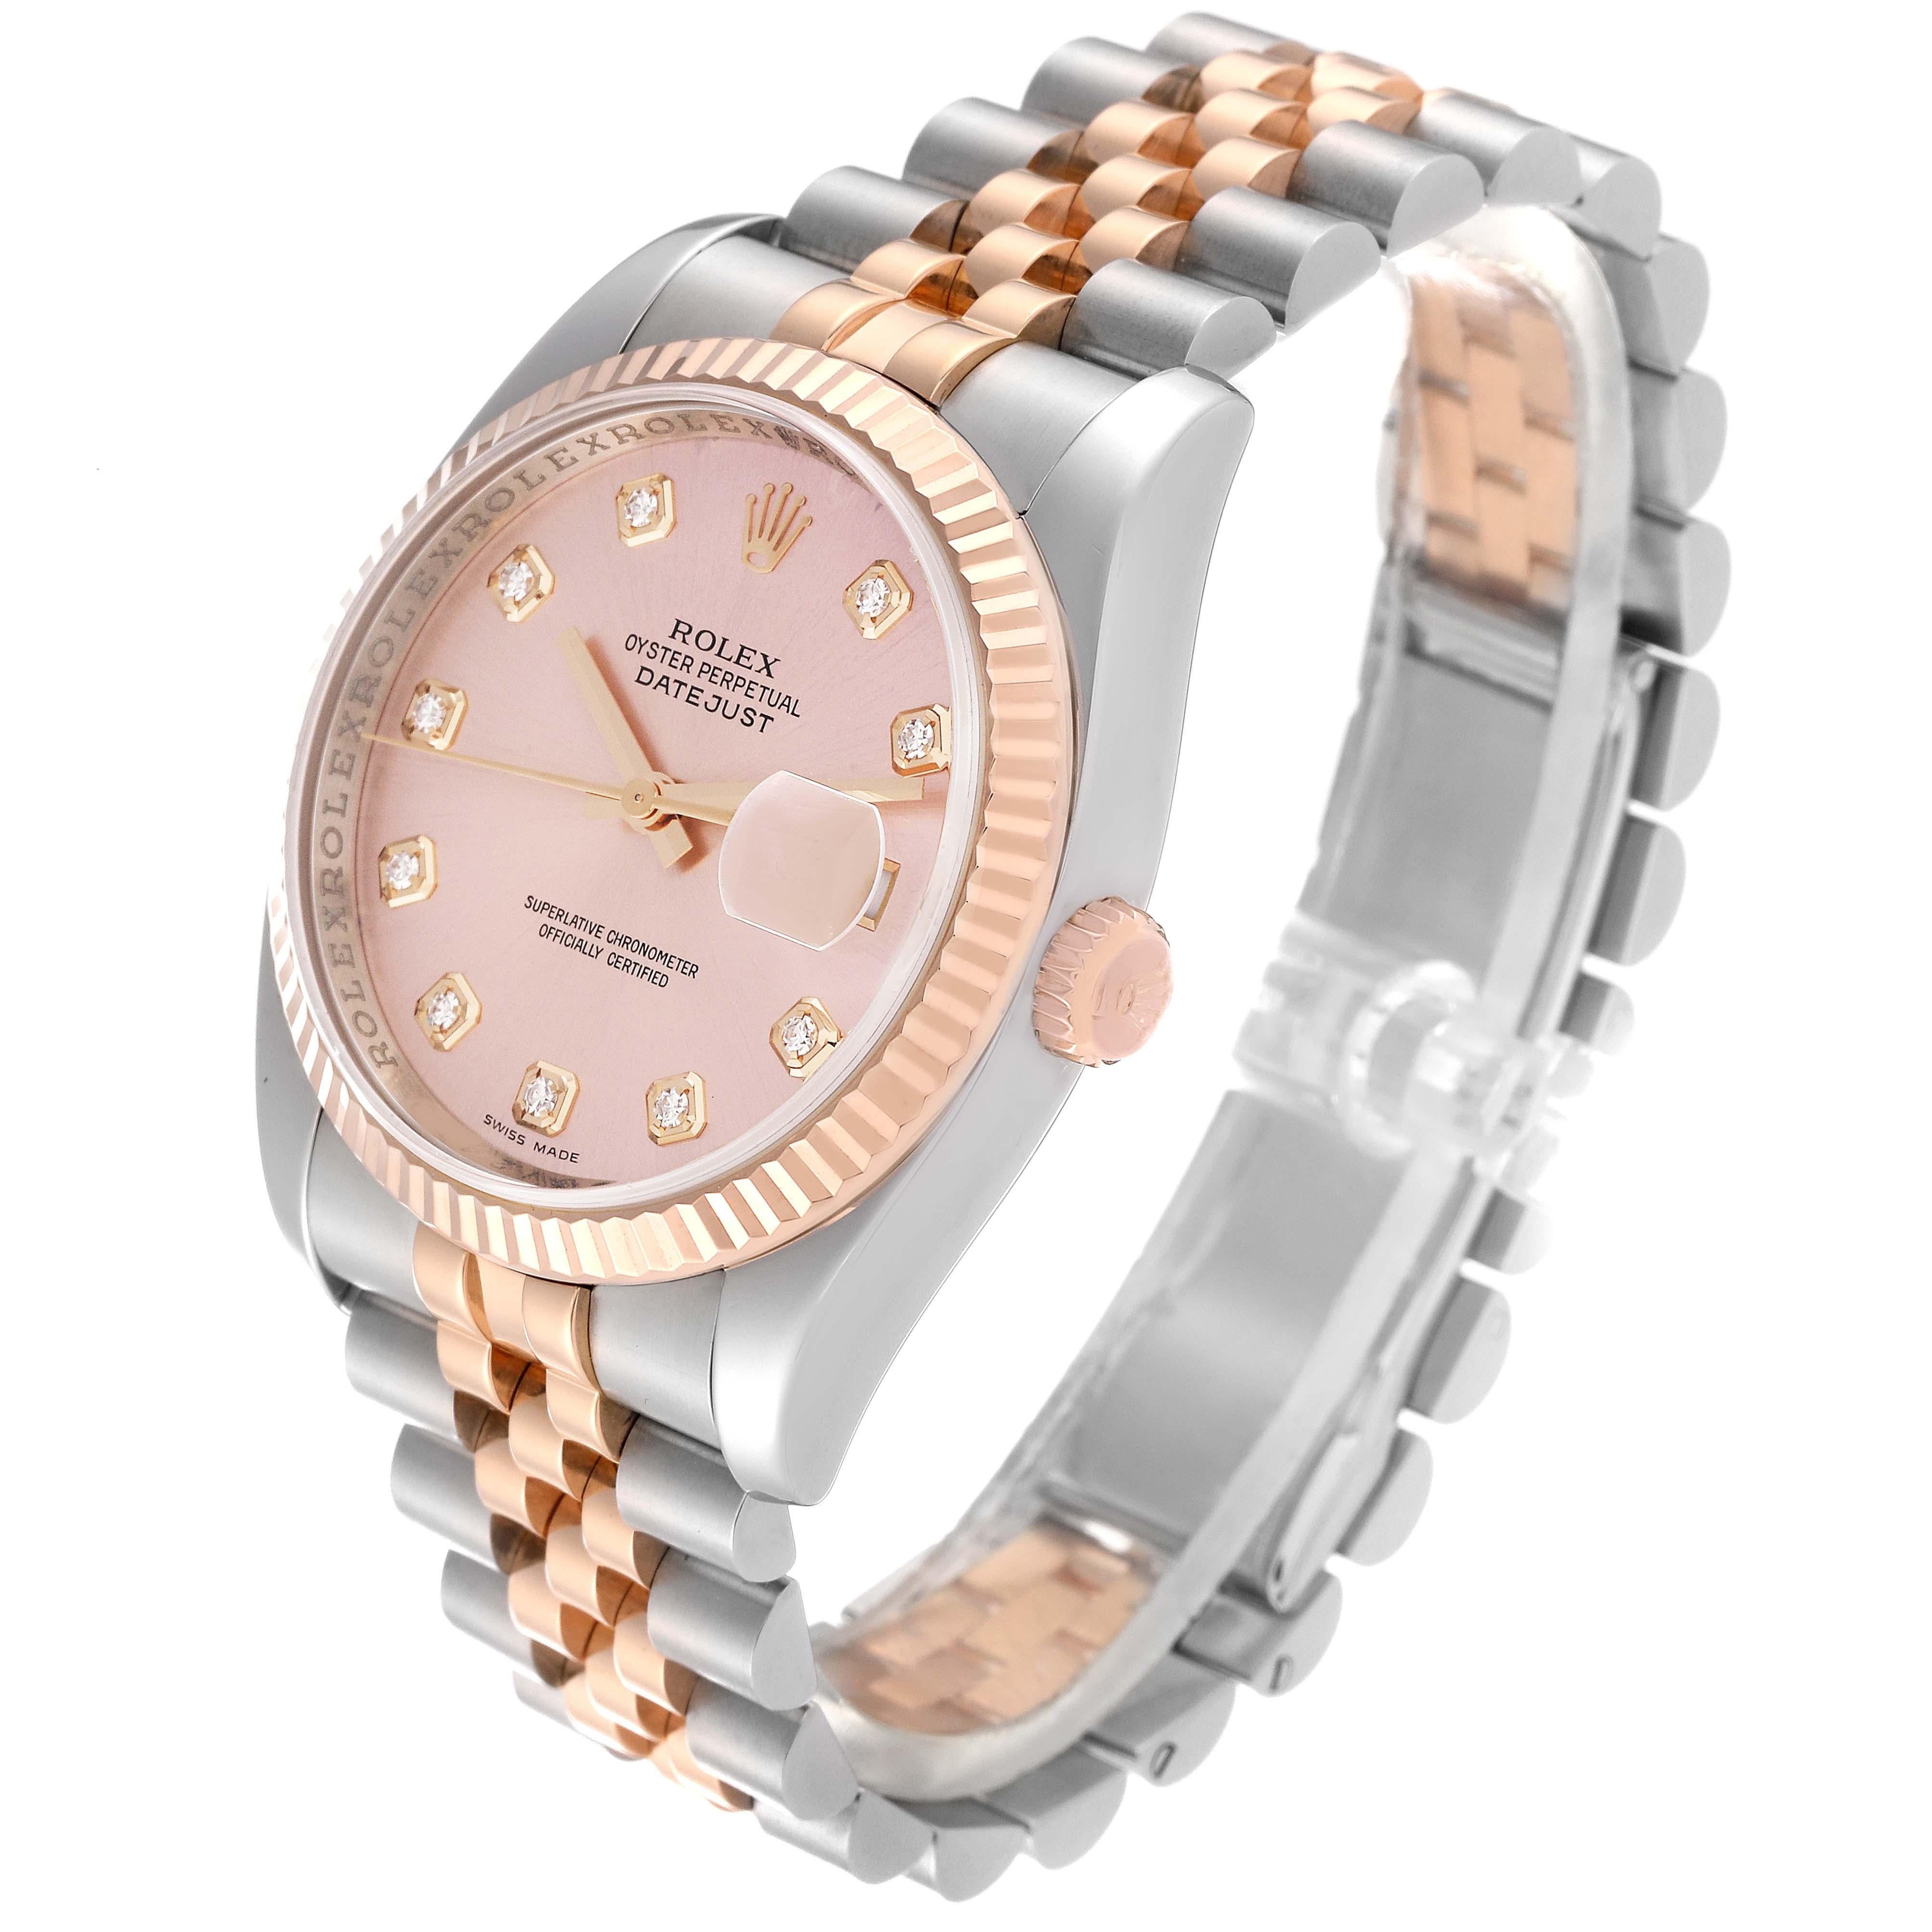 Rolex Datejust Steel Rose Gold Pink Diamond Dial Mens Watch 116231 For Sale 6